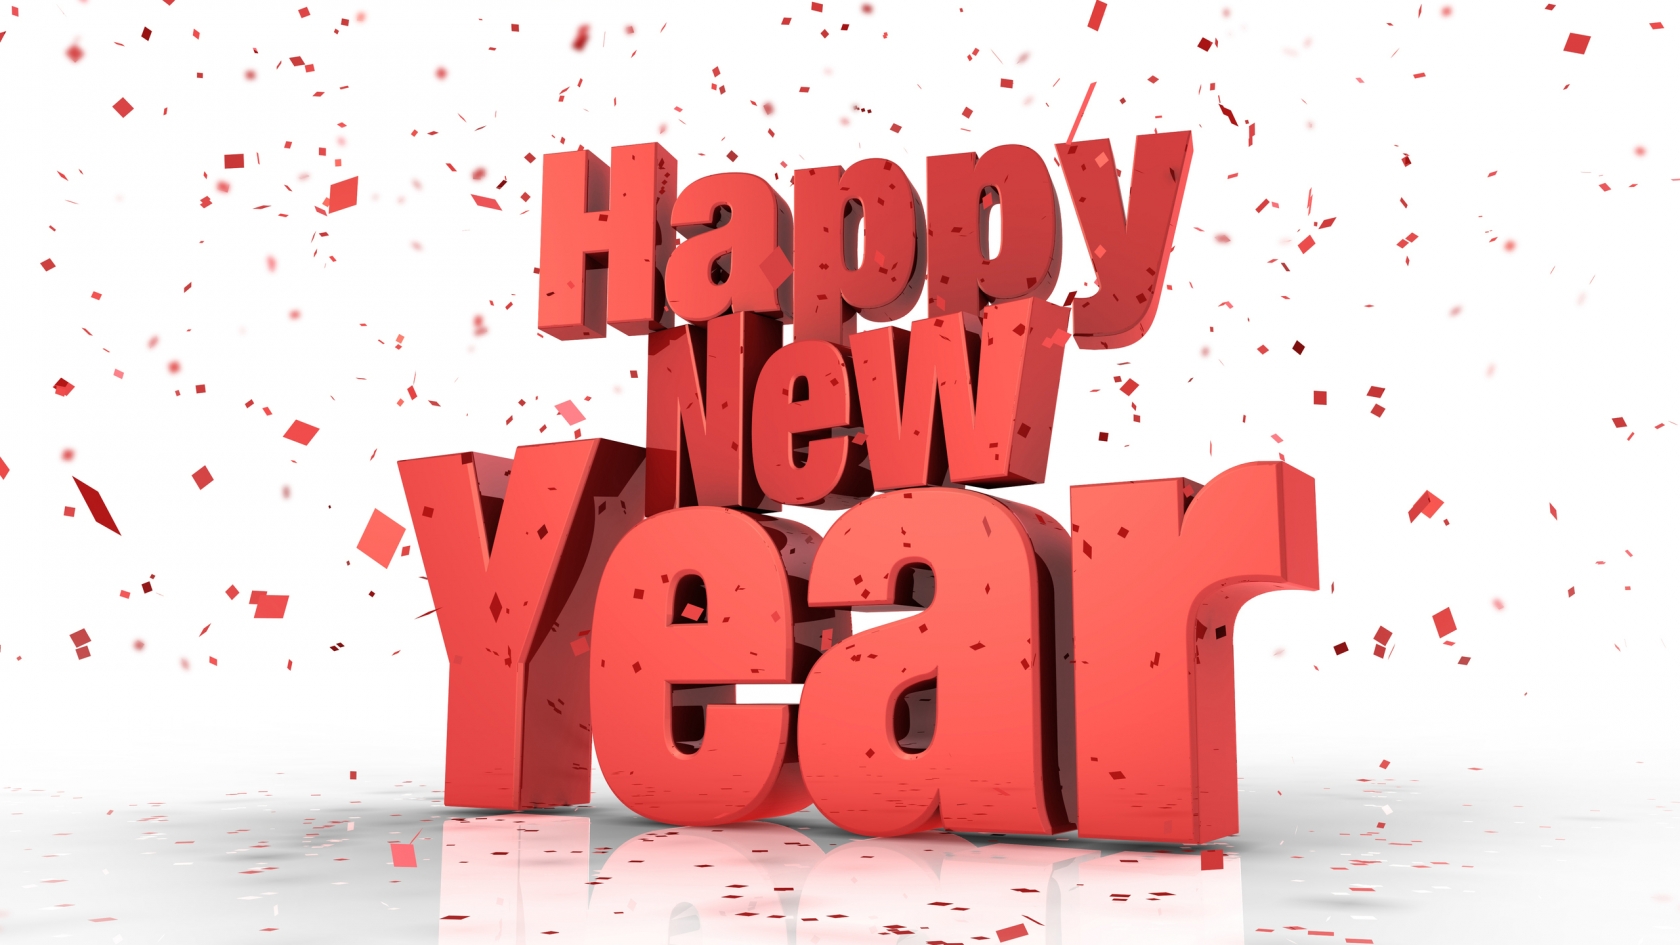 Happy New Year Font for 1680 x 945 HDTV resolution